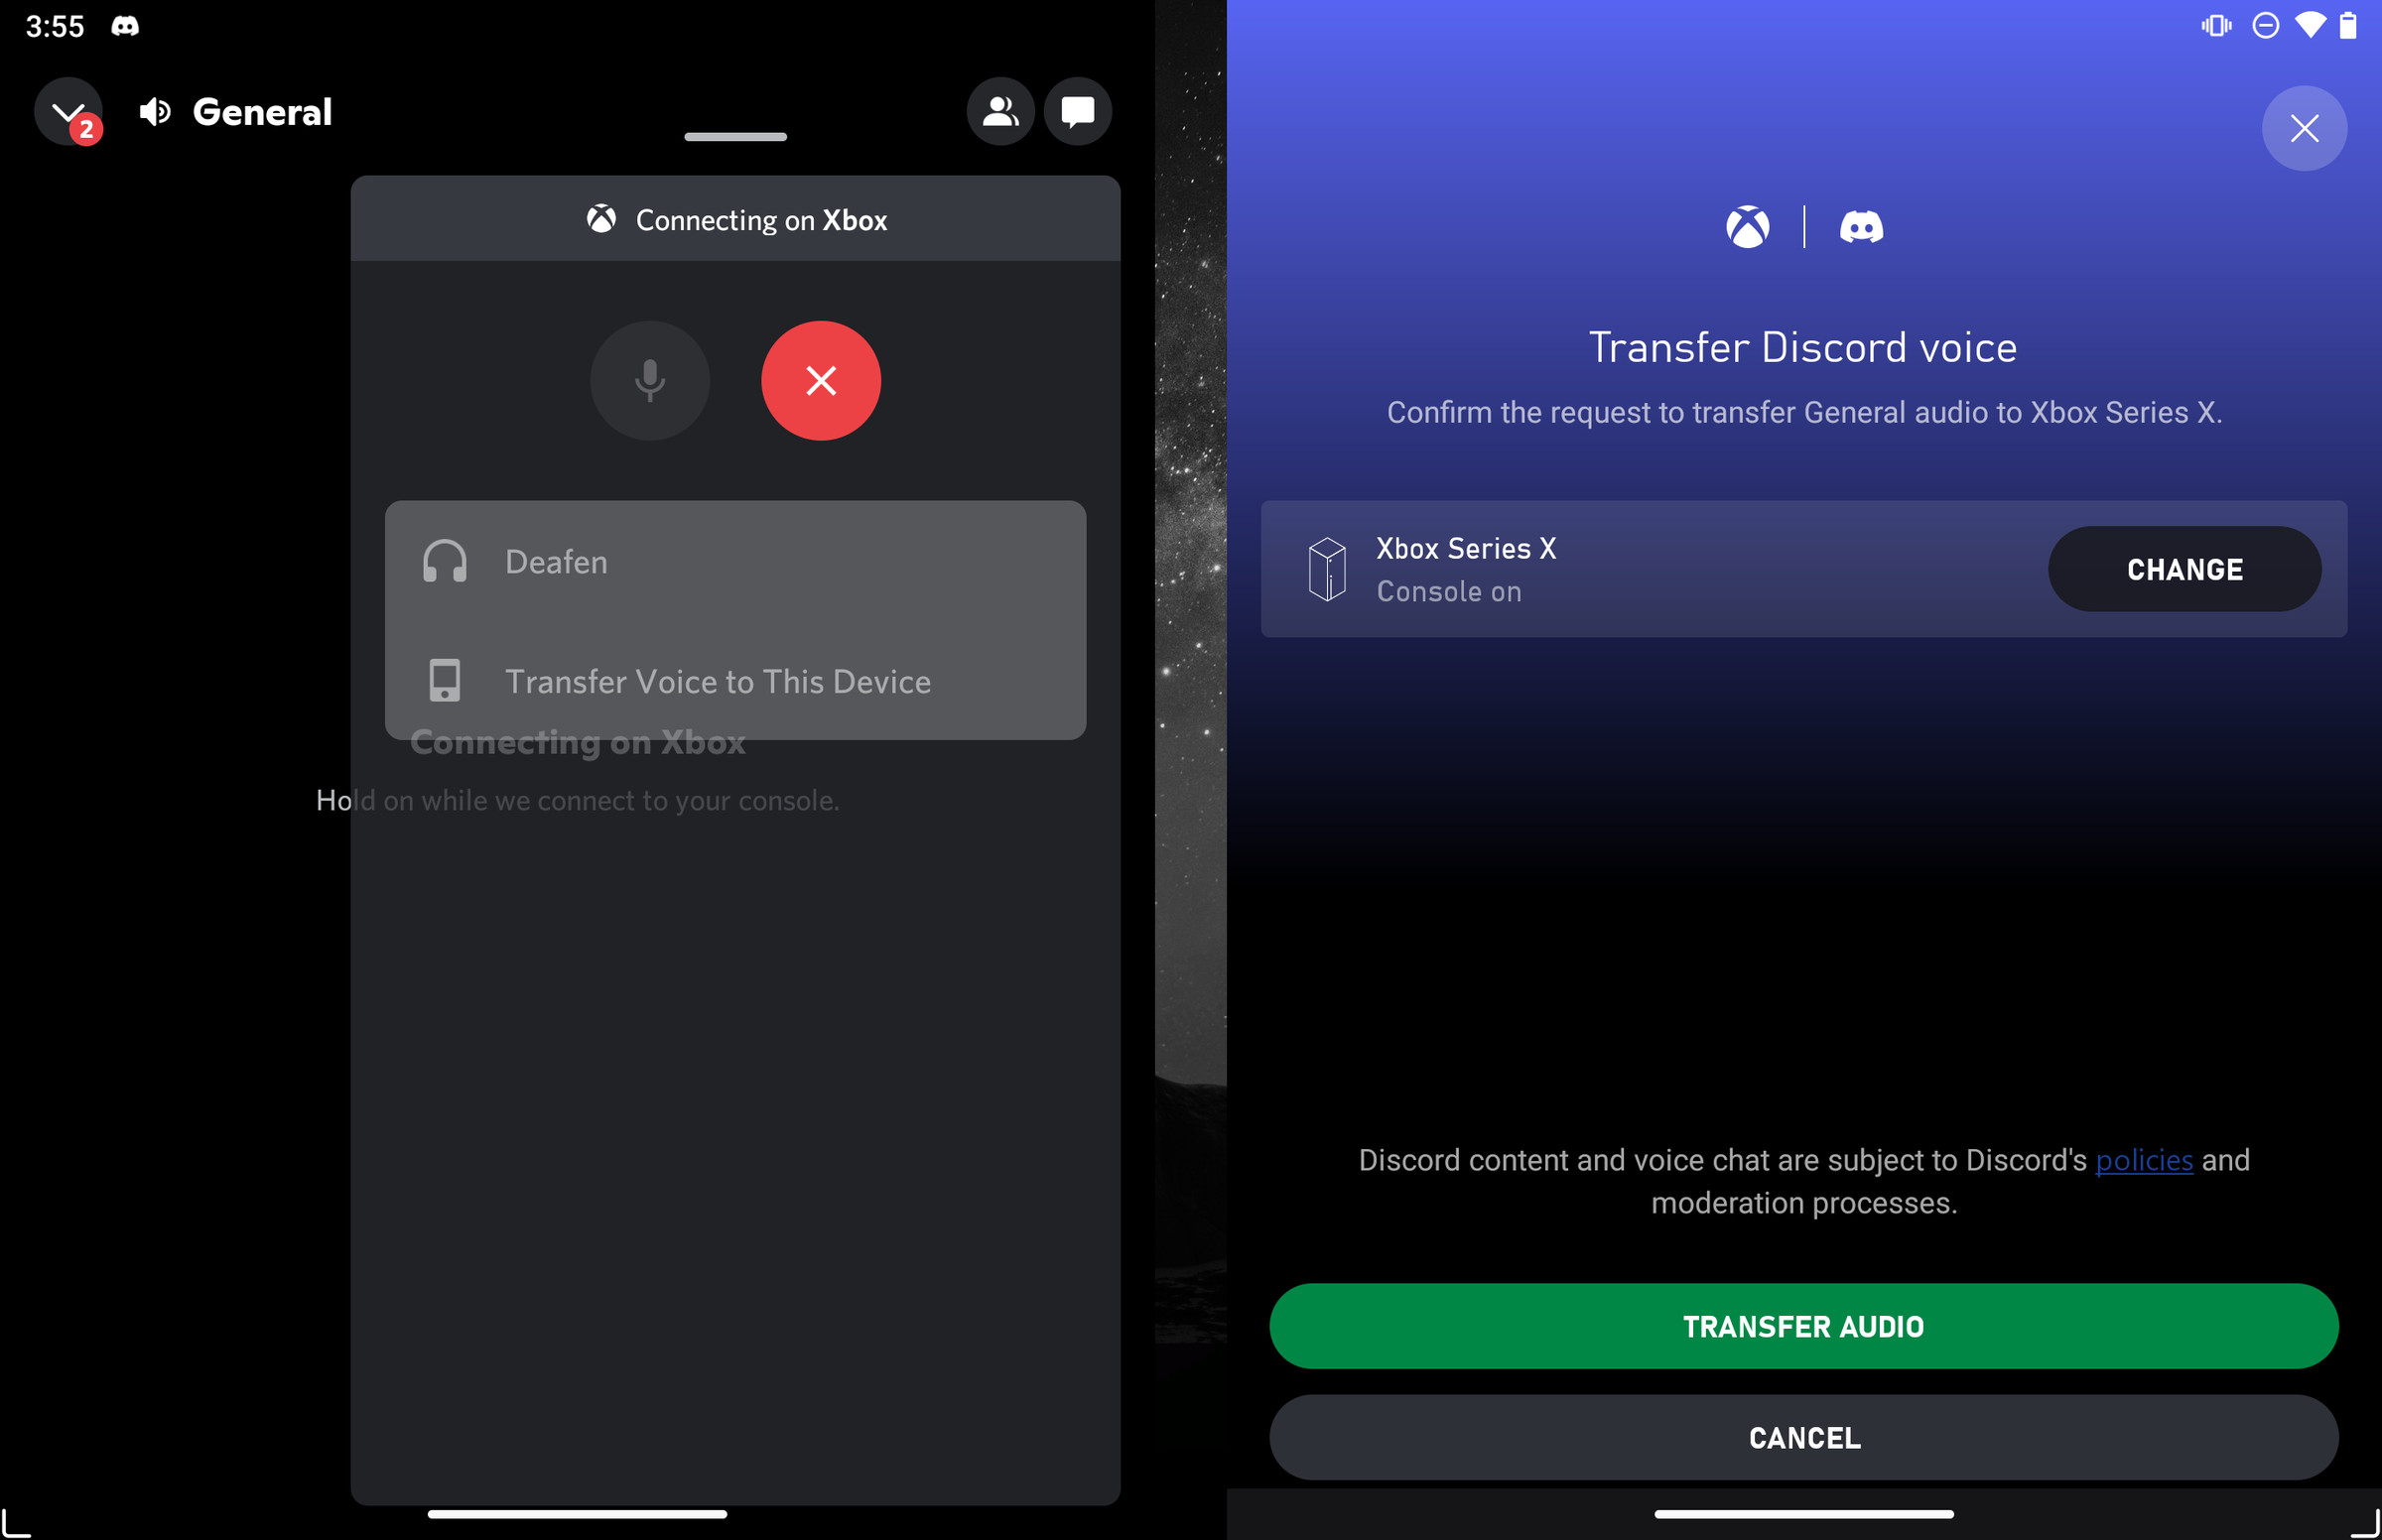 Transferring Discord calls requires the Discord and Xbox mobile apps.